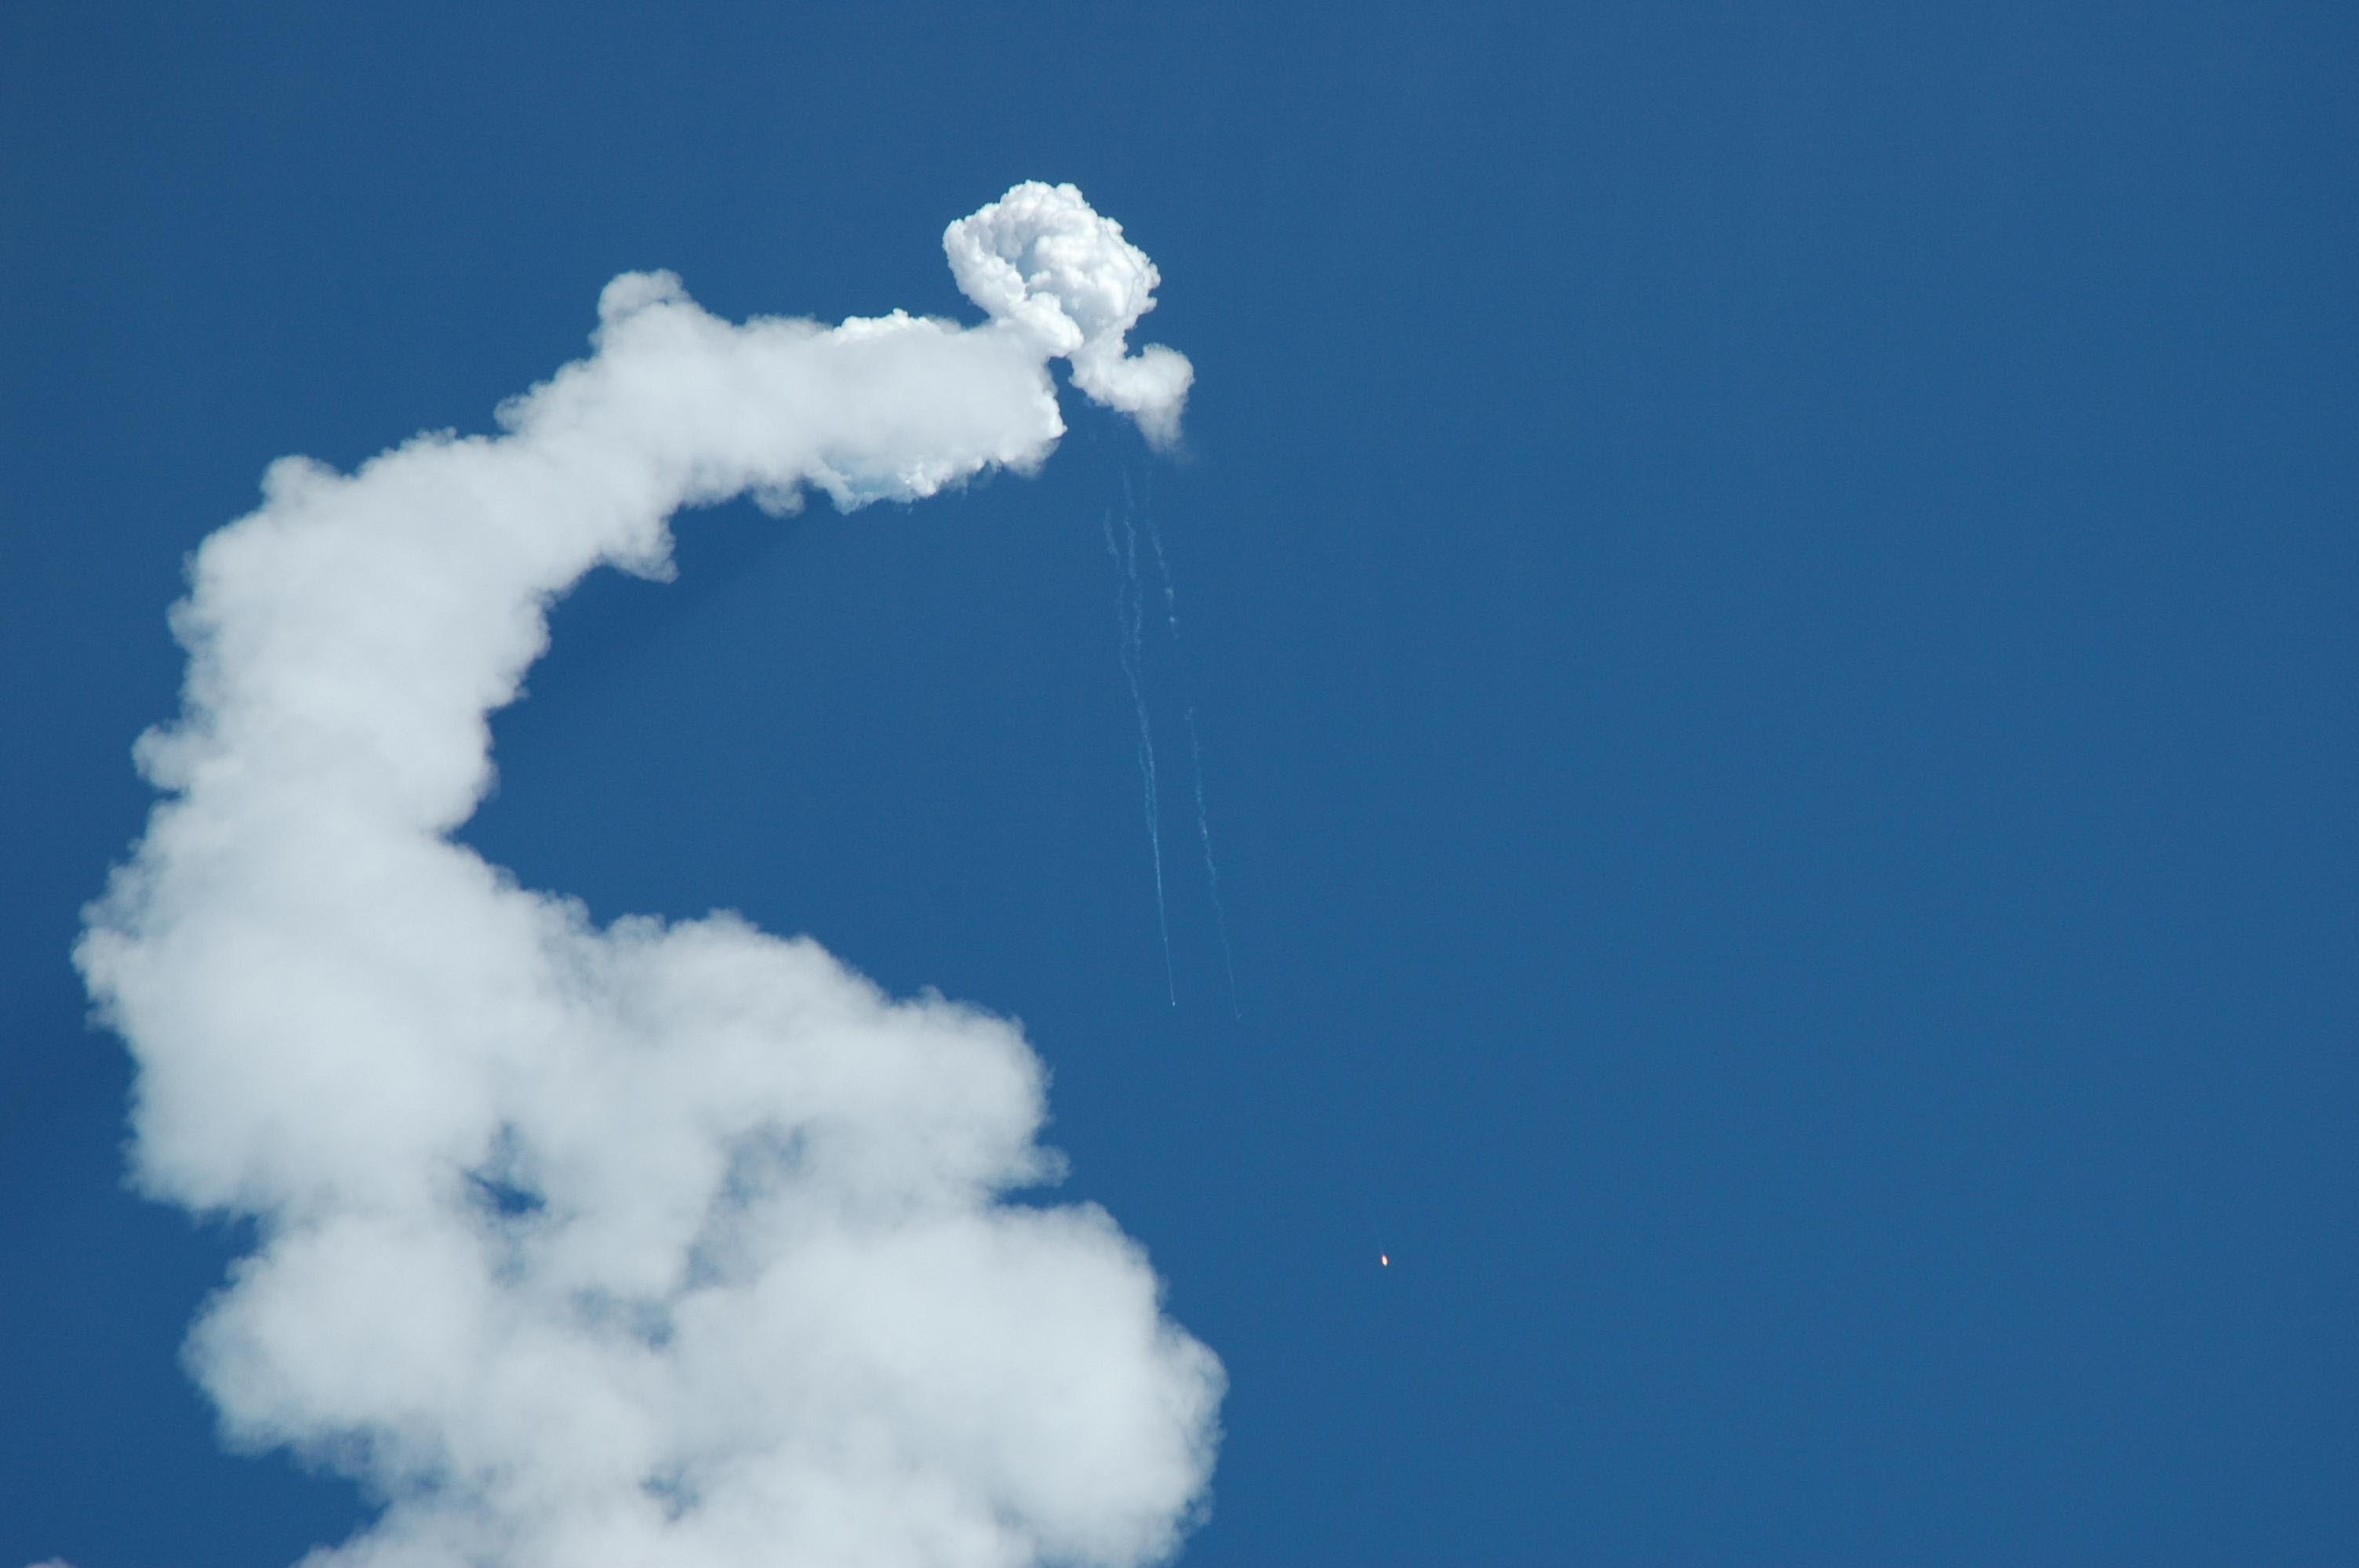 Seen from a distance, NASA's Swift spacecraft lifts off from Complex 17A, Cape Canaveral Air Force Station